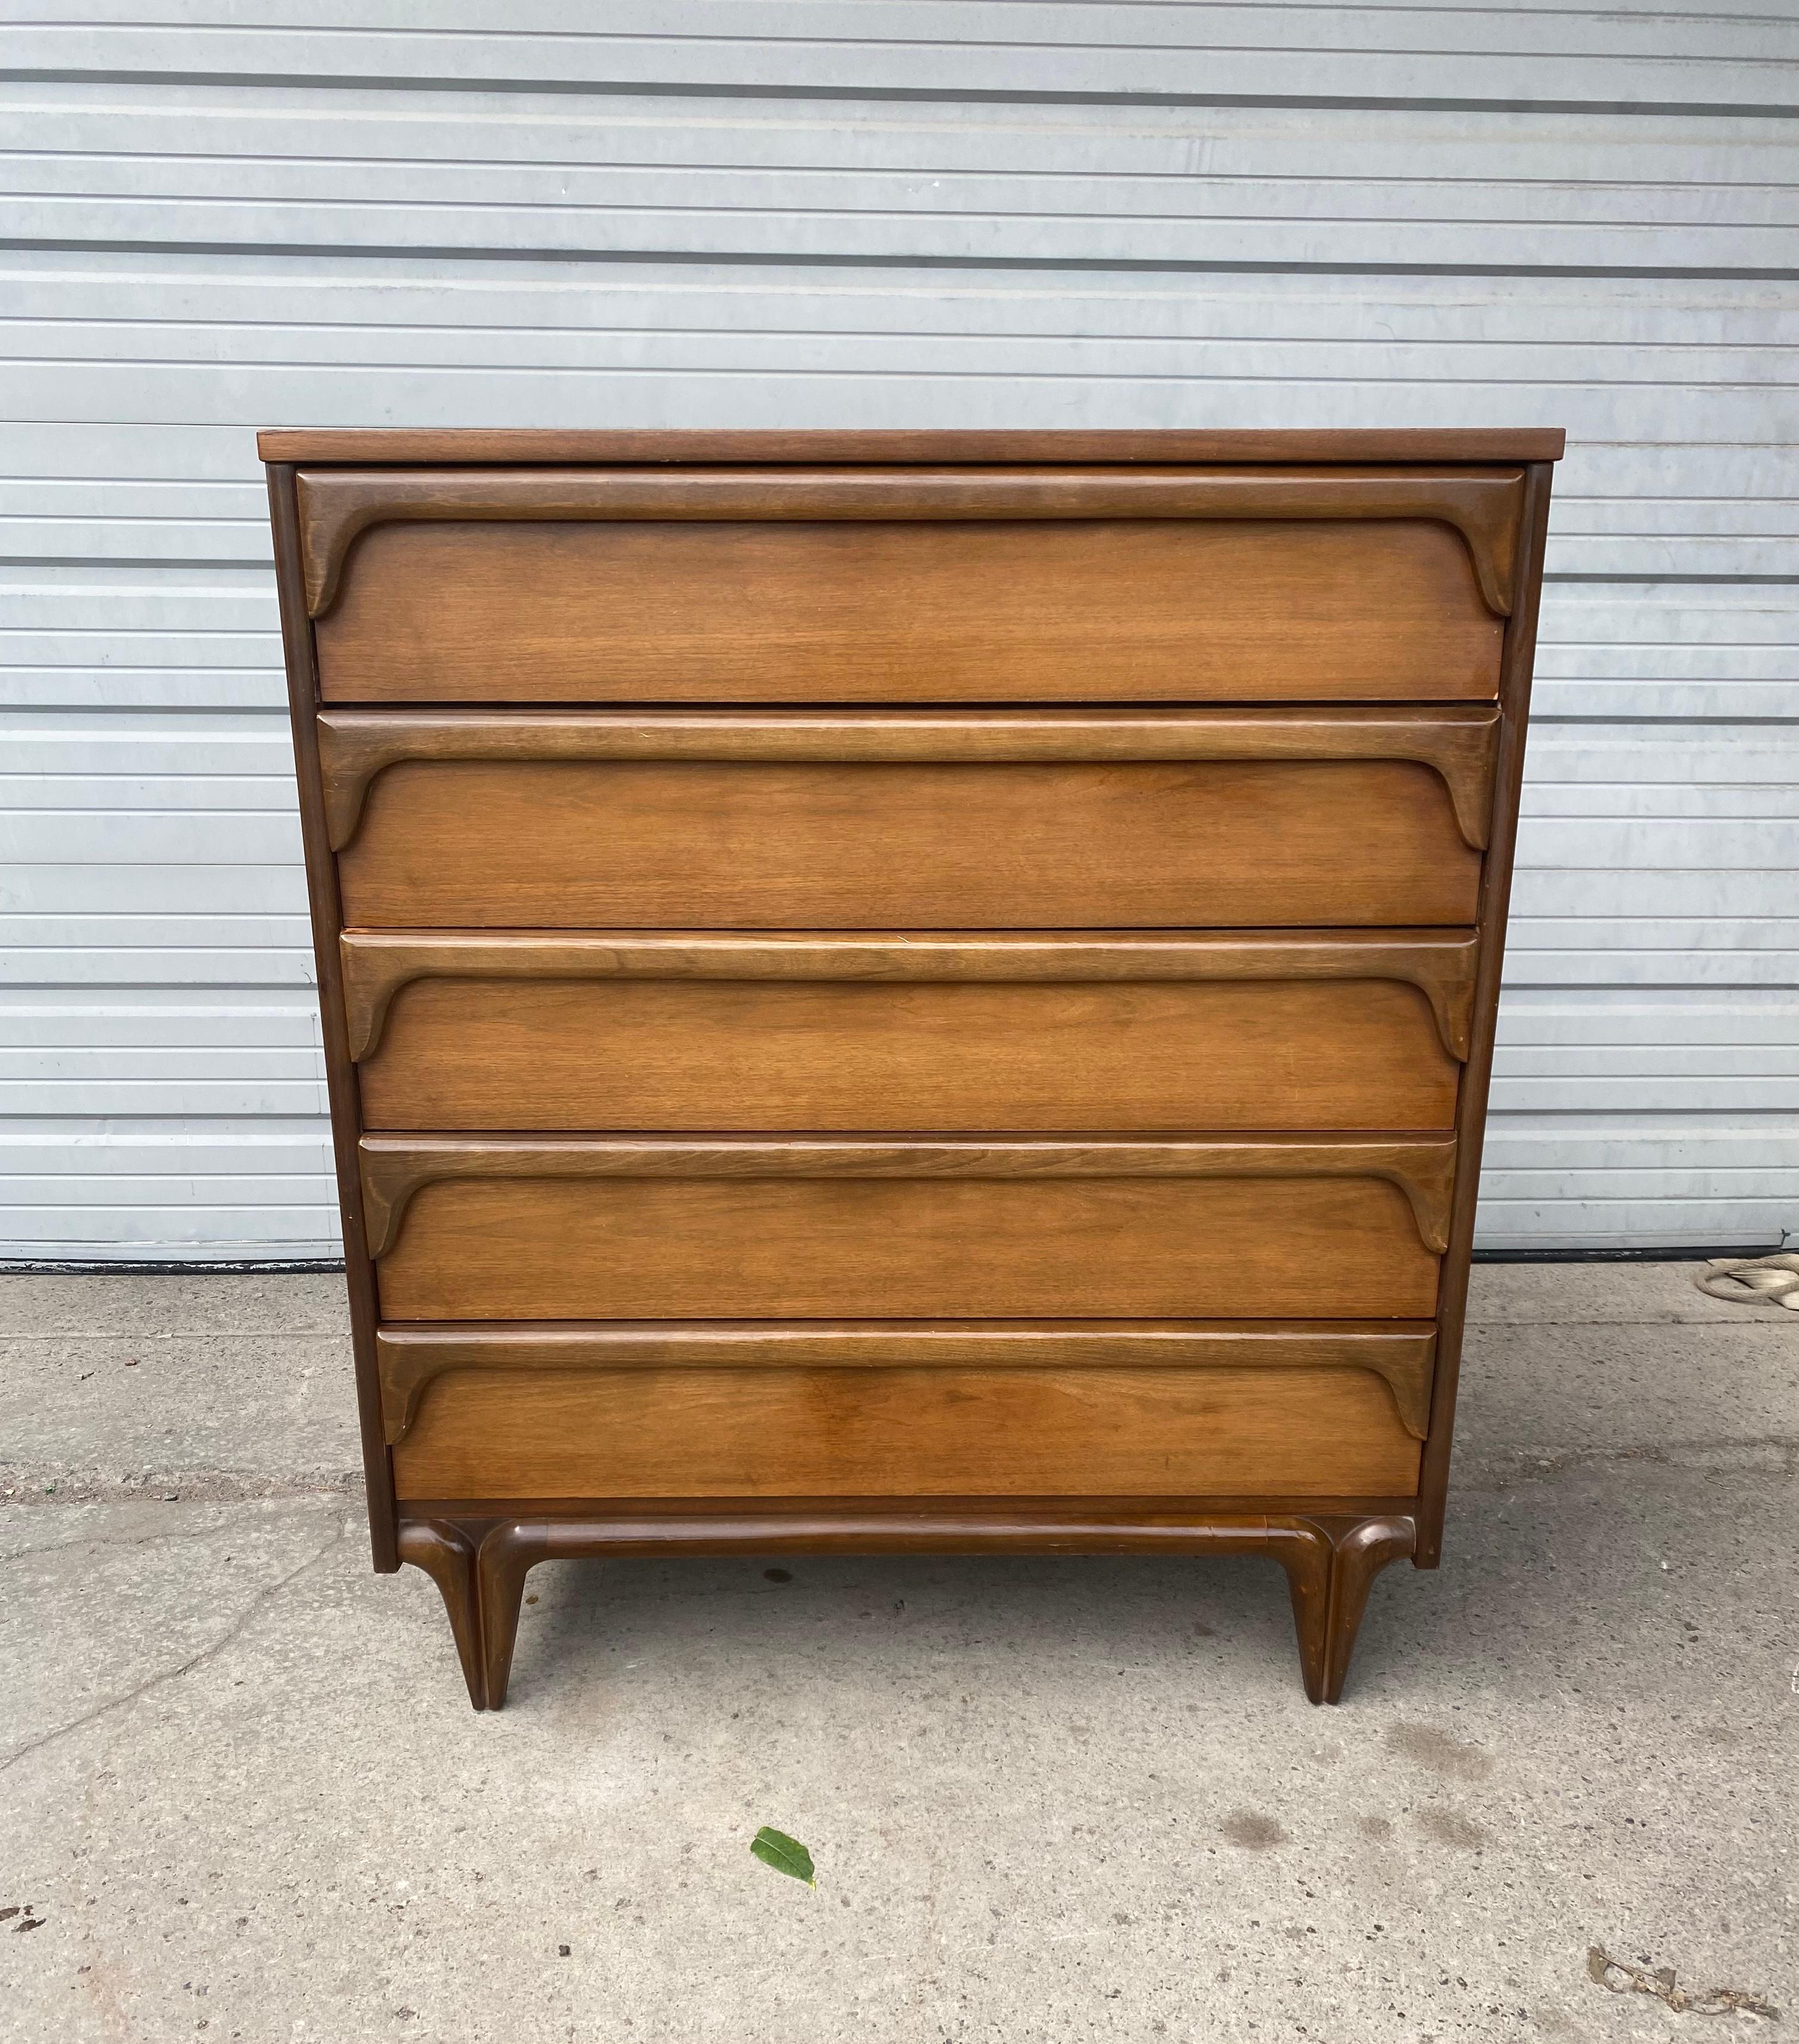 Classic Mid-Century Modern 5-drawer chest. Sculptural walnut by Bassett Furniture company. Wonderful design. Elegant yet whimsical, superior quality and construction, dove-tail drawers. Generous storage. Smooth function. Hand delivery avail to New